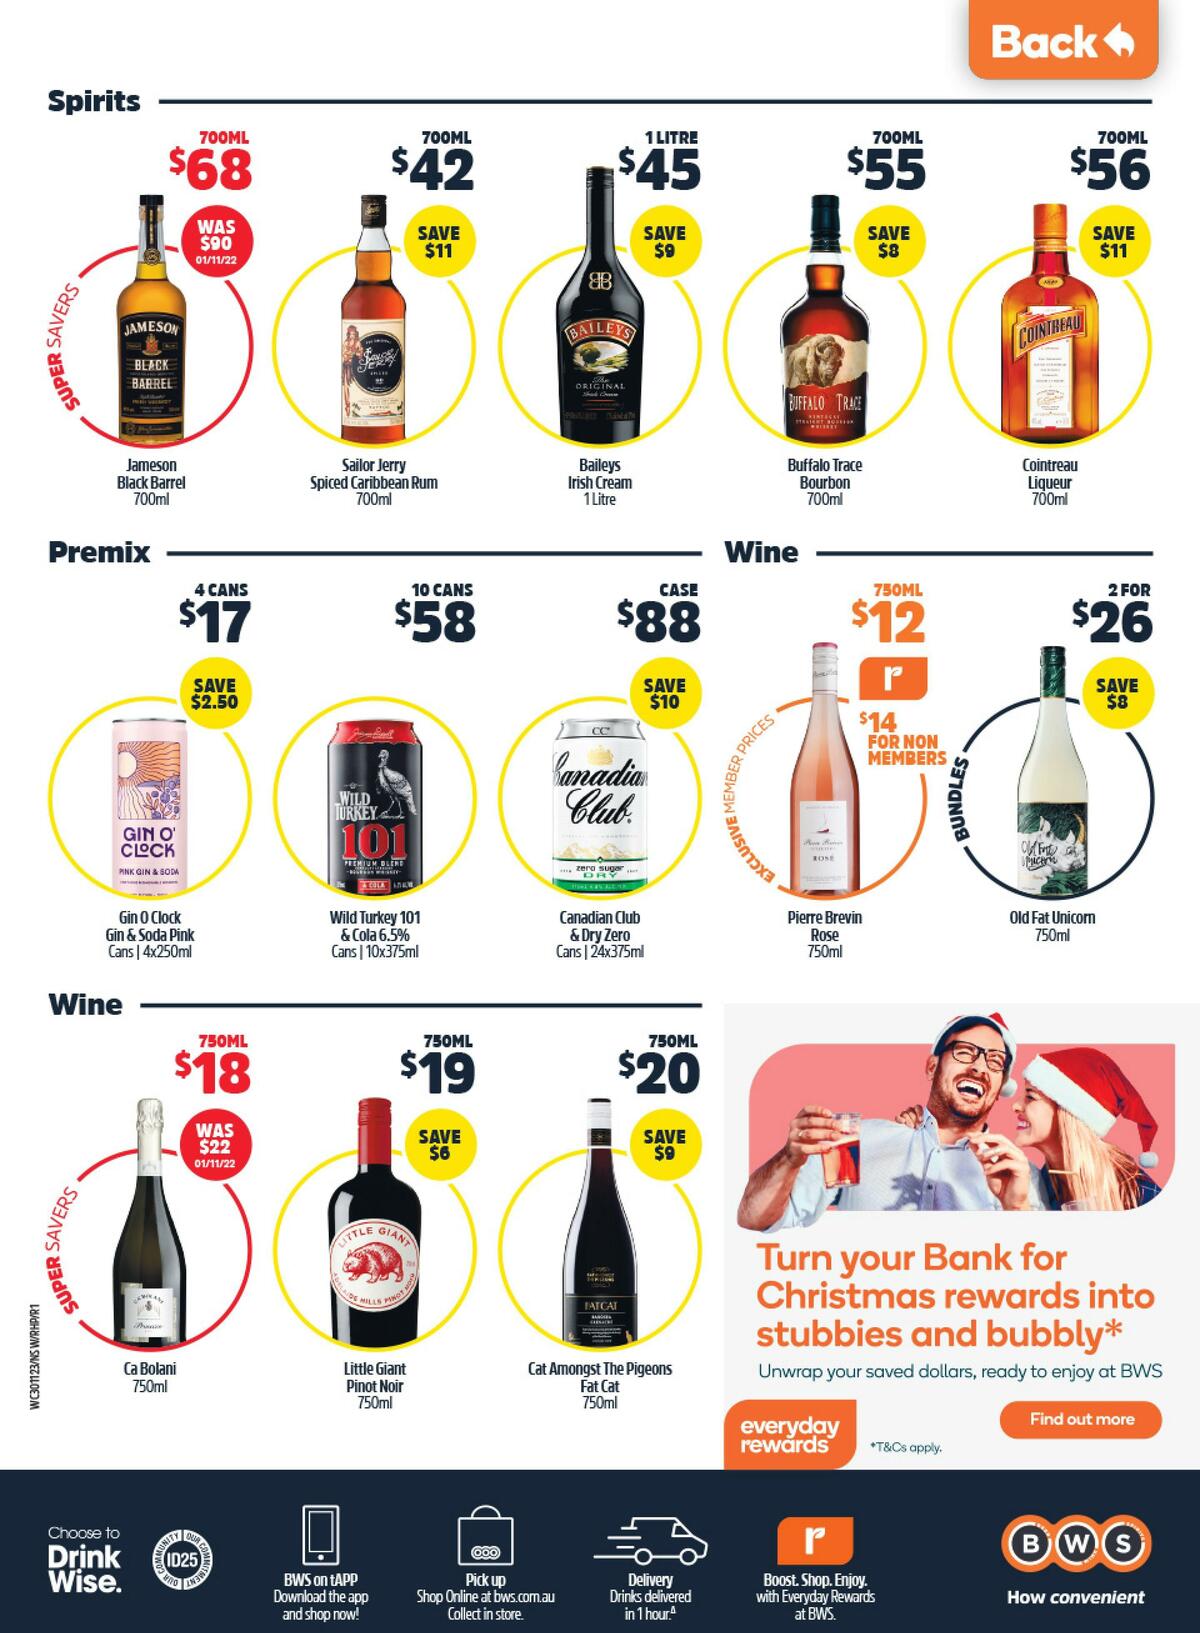 Woolworths Catalogues from 30 November